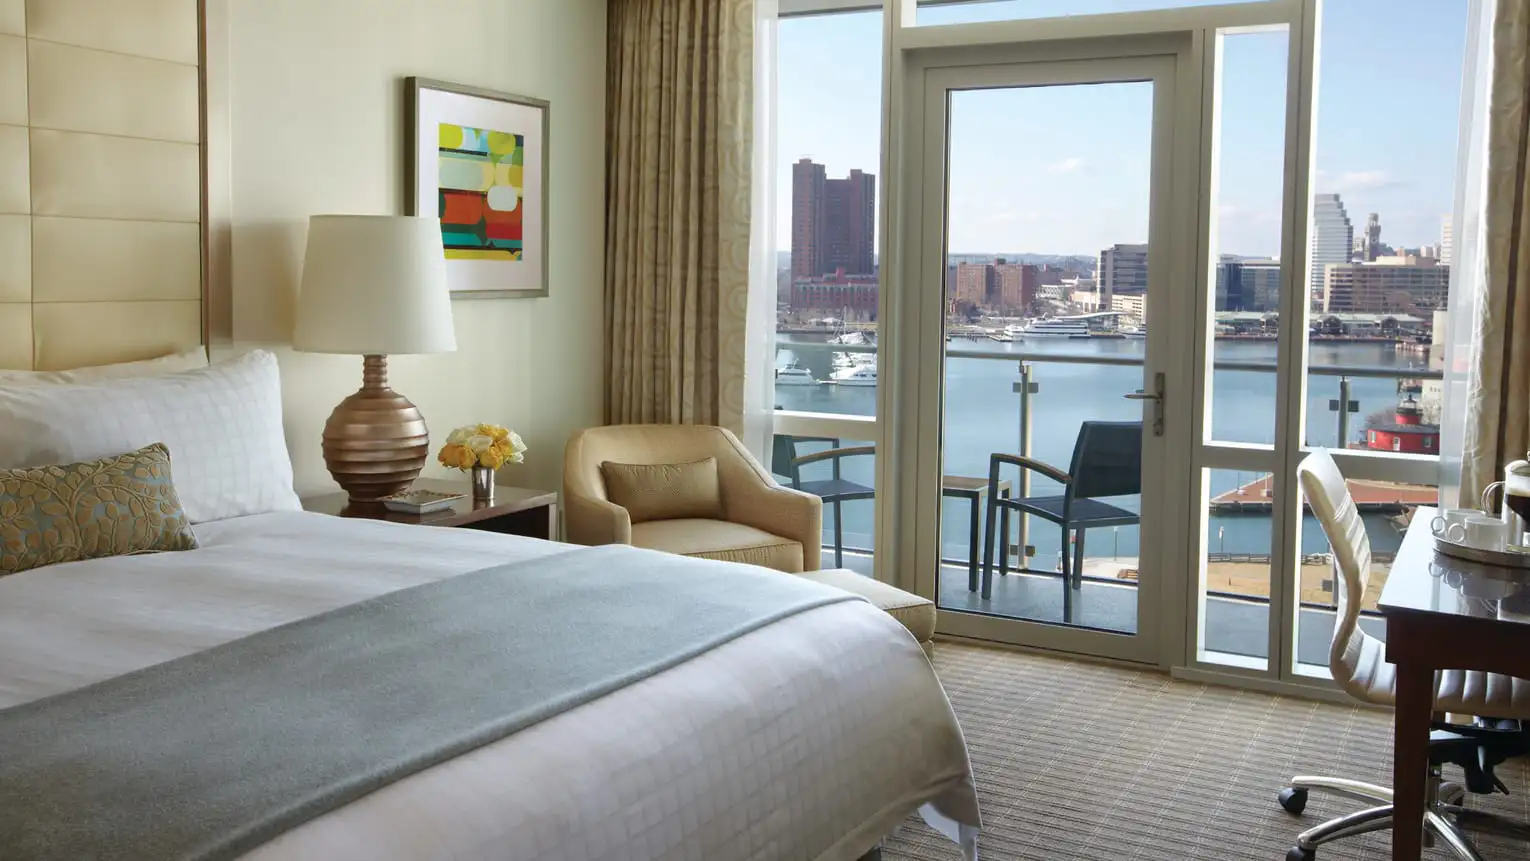 Four Seasons Baltimore Hotel Room with King bed and view